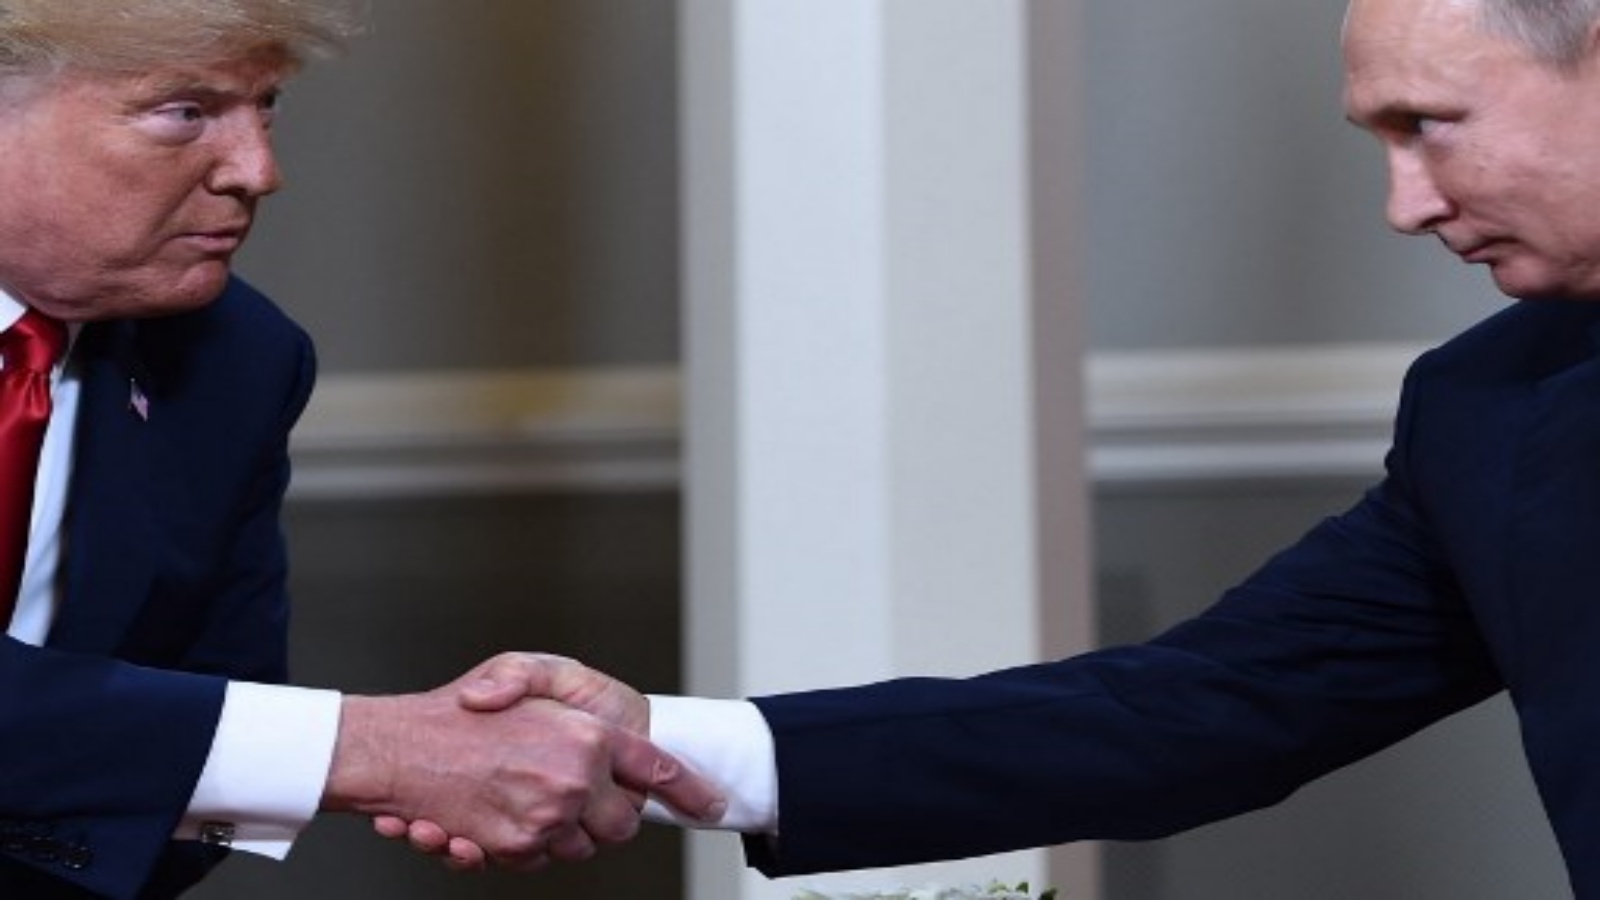 (FILES) In this file photo taken on July 16, 2018 US President Donald Trump (L) and Russian President Vladimir Putin shake hands ahead a meeting in Helsinki. - US President Donald Trump, who is seeking reelection on November 3, has regularly jolted the world with statements about other leaders that sharply deviate from long-held diplomatic protocol. (Photo by Brendan Smialowski / AFP)